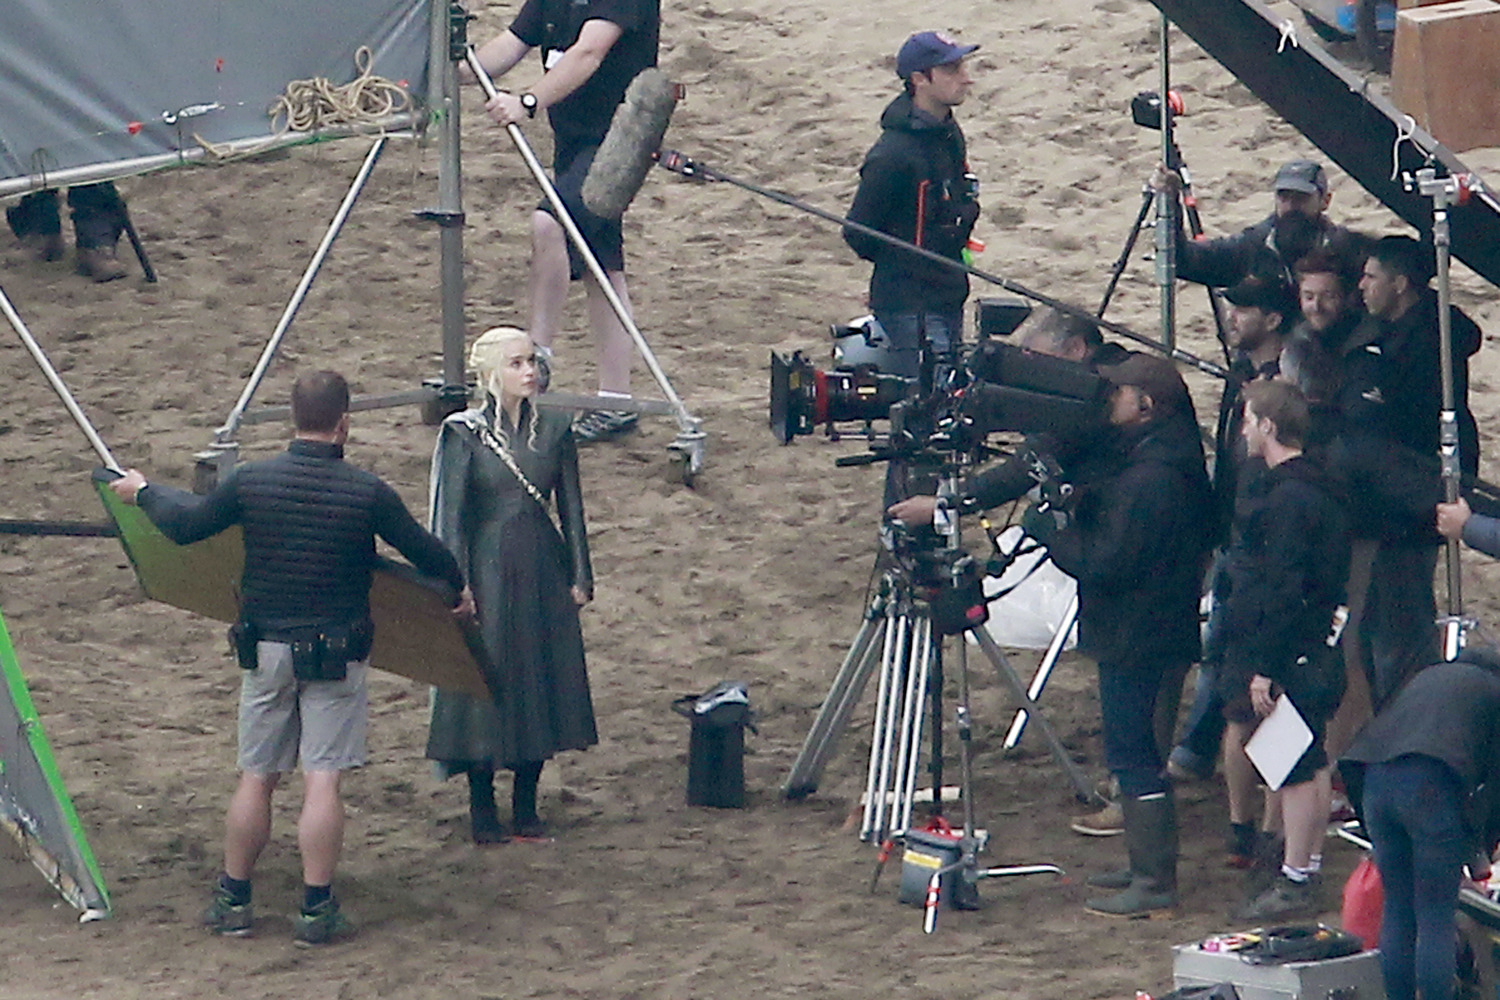 Emilia Clarke and Kit Harington film scenes for season 7 of Game of Thrones on a beach in northern Spain.